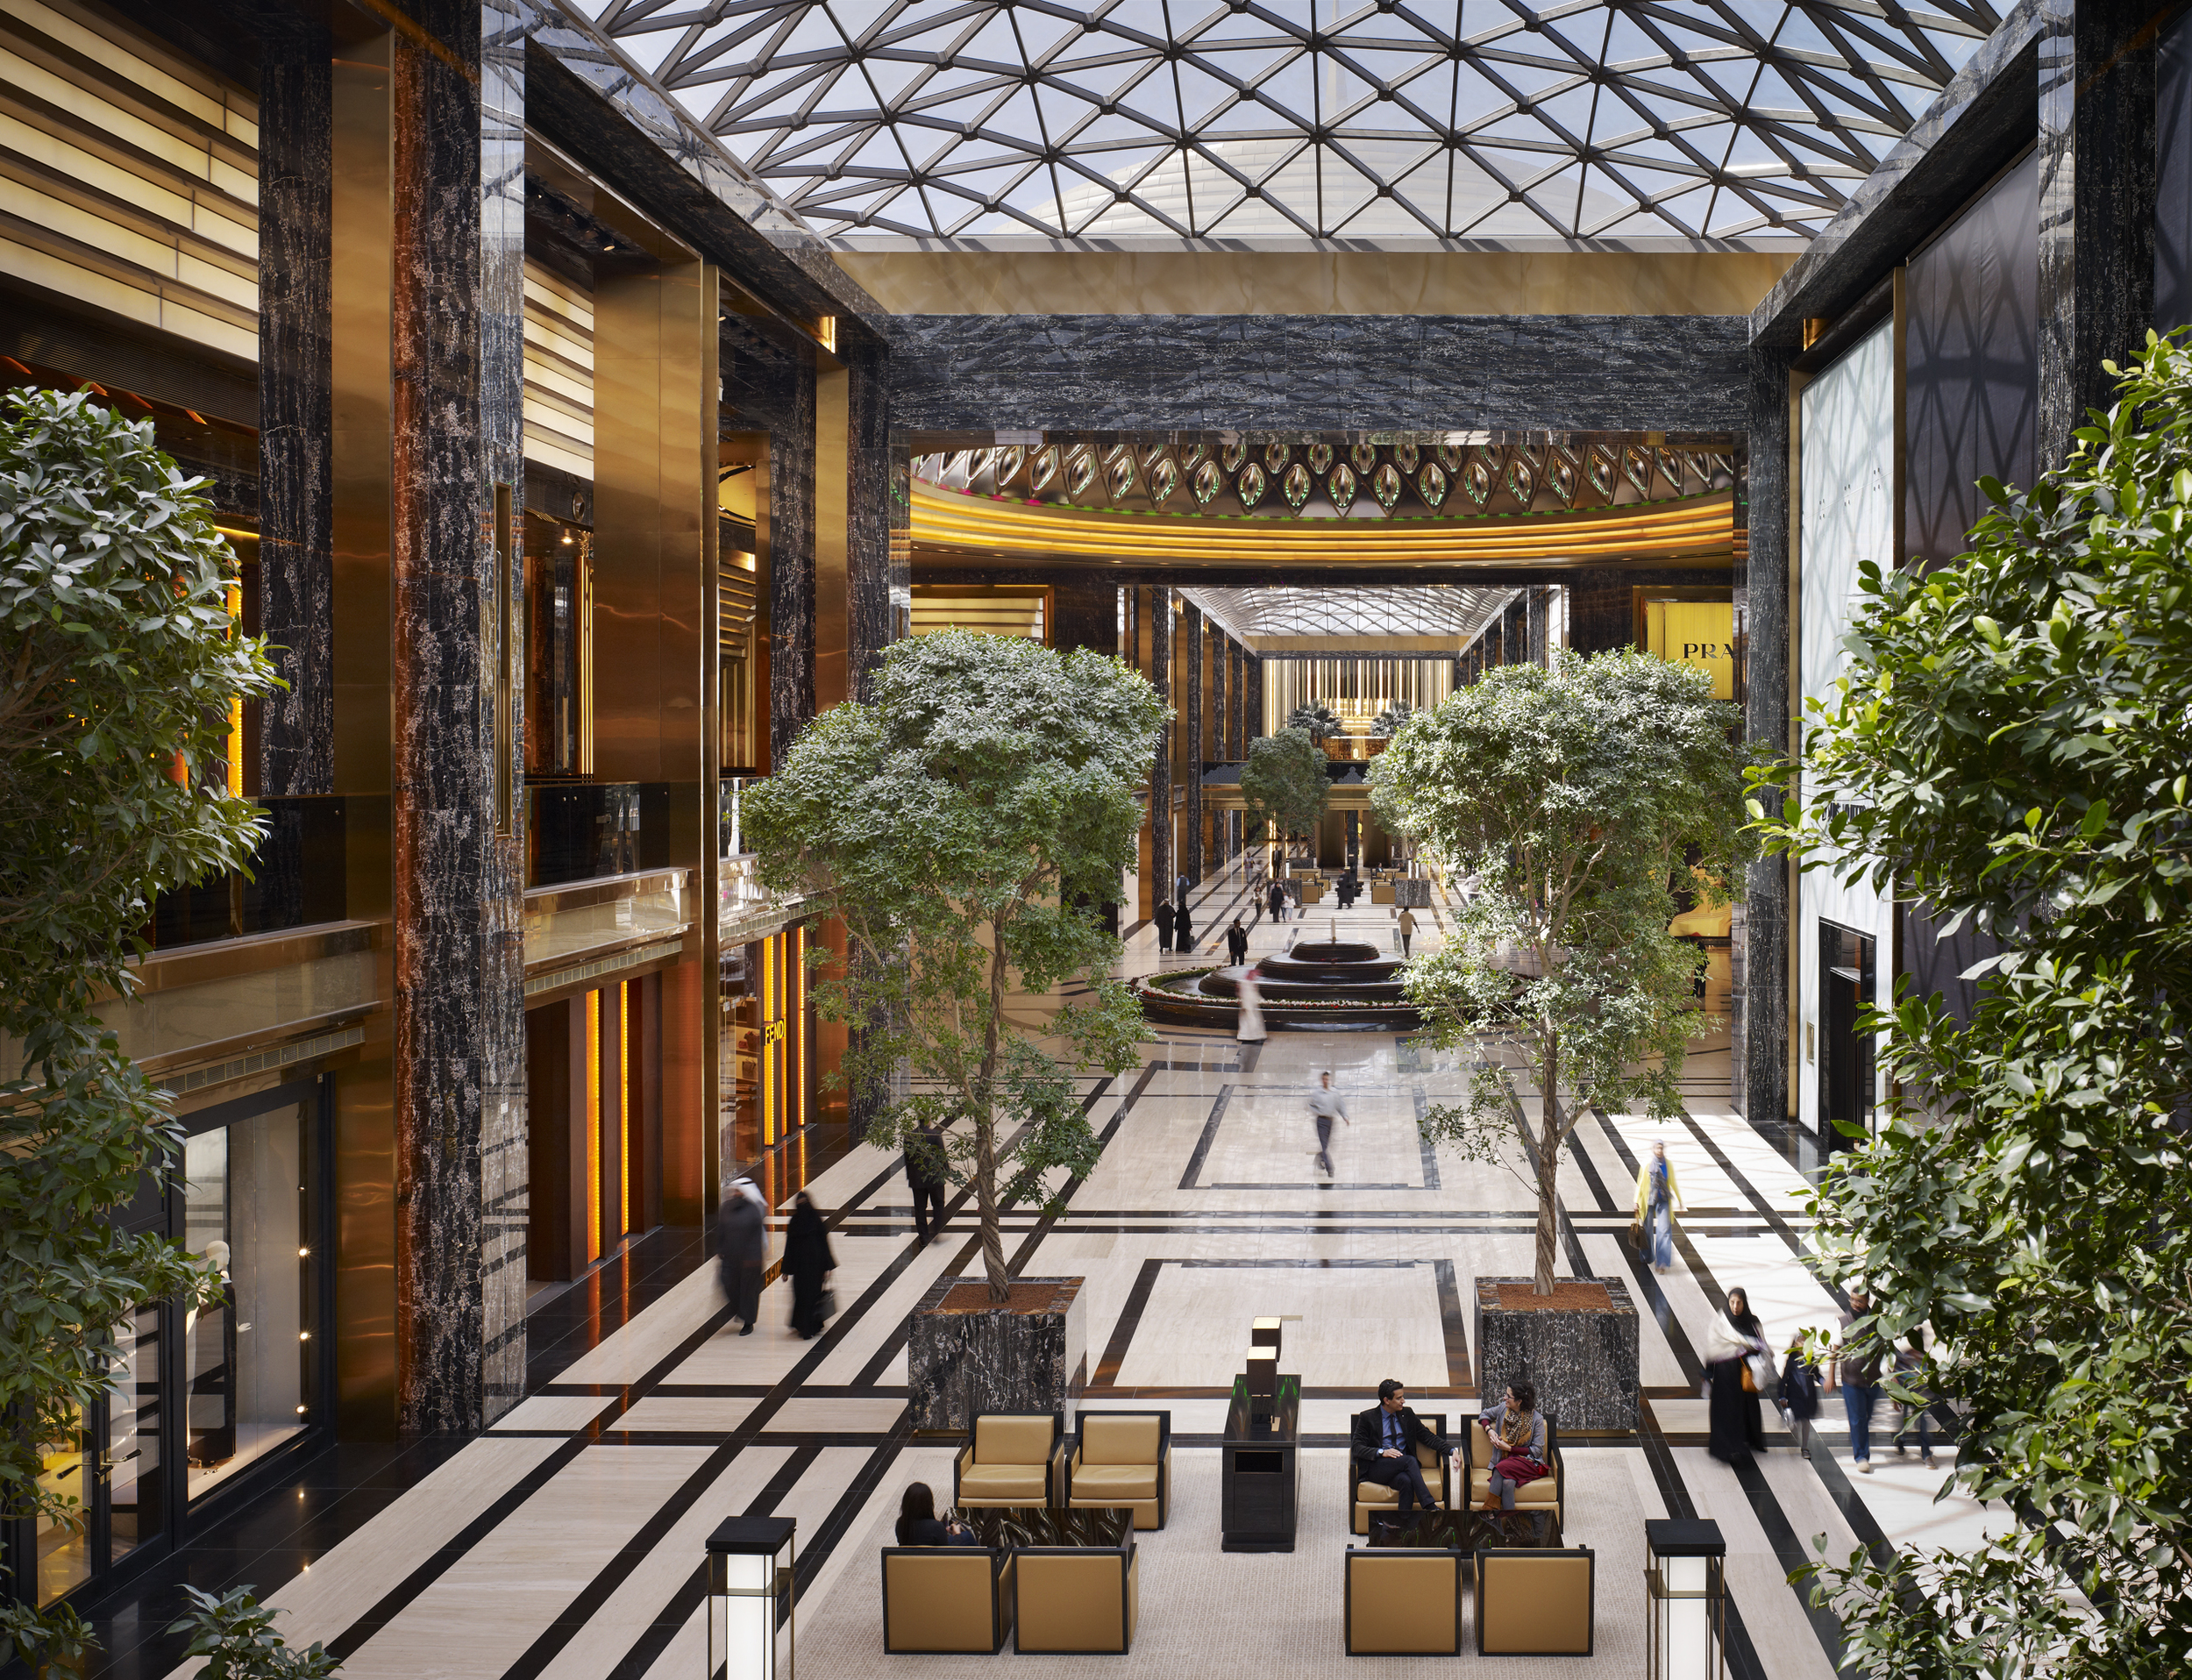  The Avenues: Phase III  PACE with Gensler  Kuwait City  &nbsp;   Return to Projects  